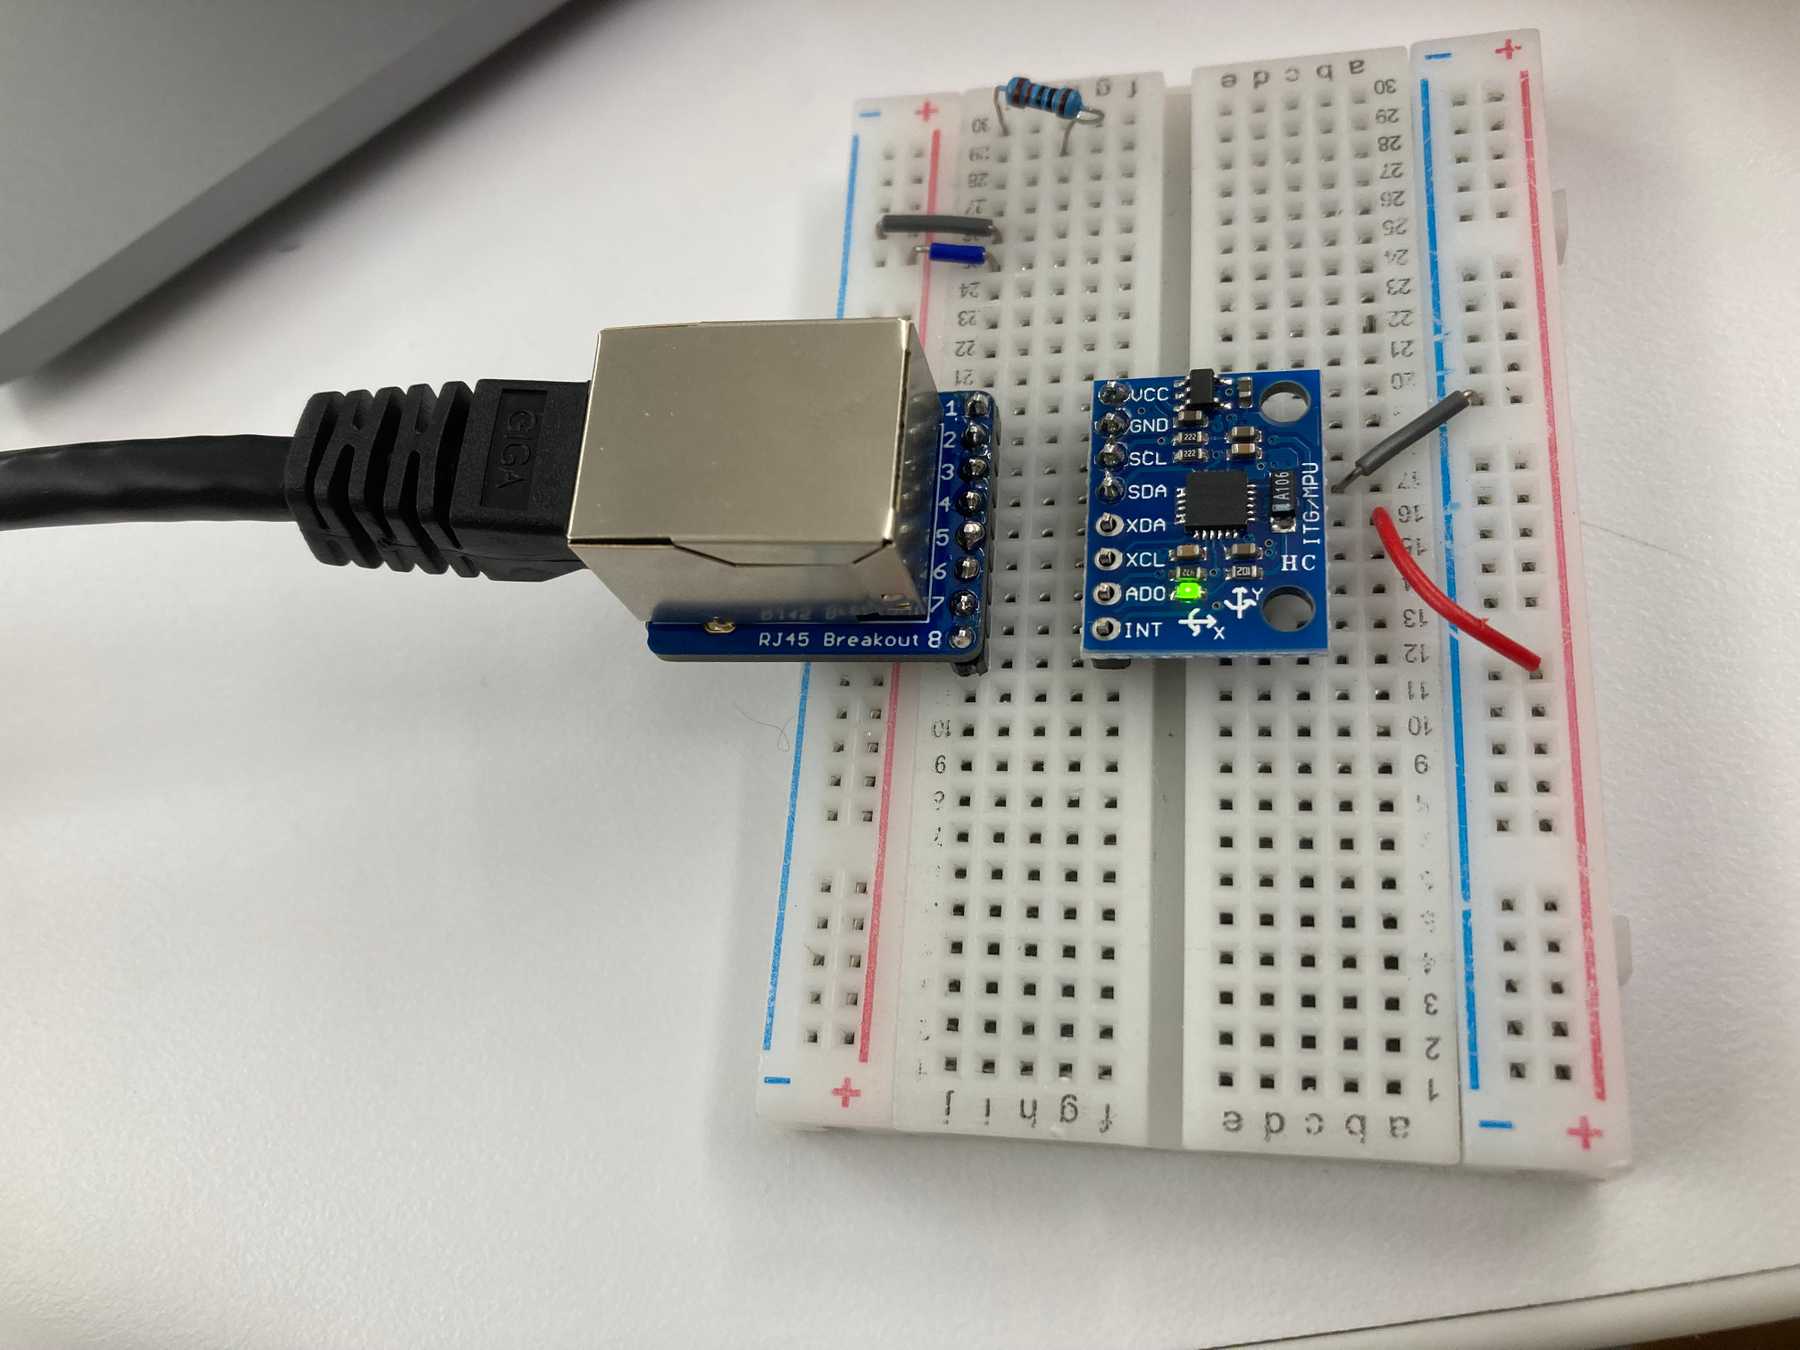 Moving the accelerometer to another breadboard